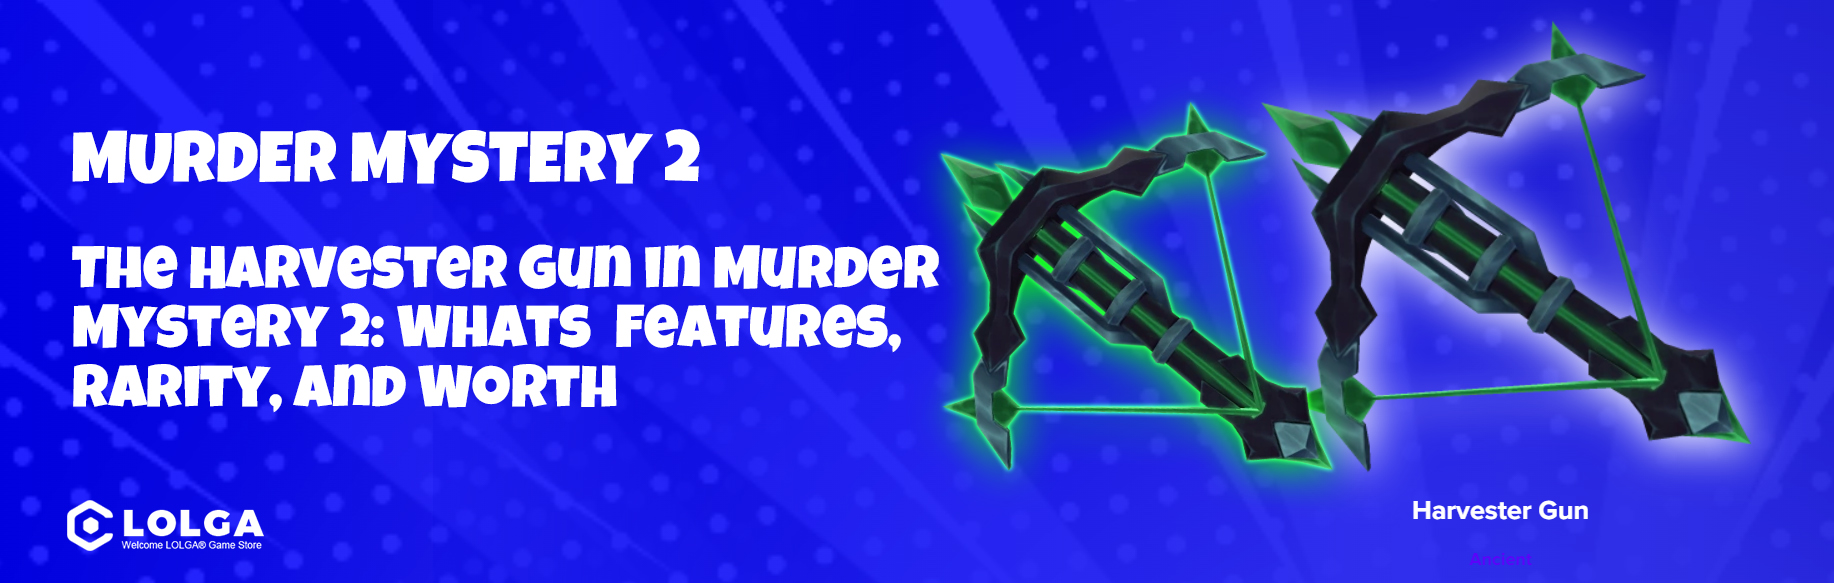  The Harvester Gun in Murder Mystery 2: Whats  Features, Rarity, and Worth